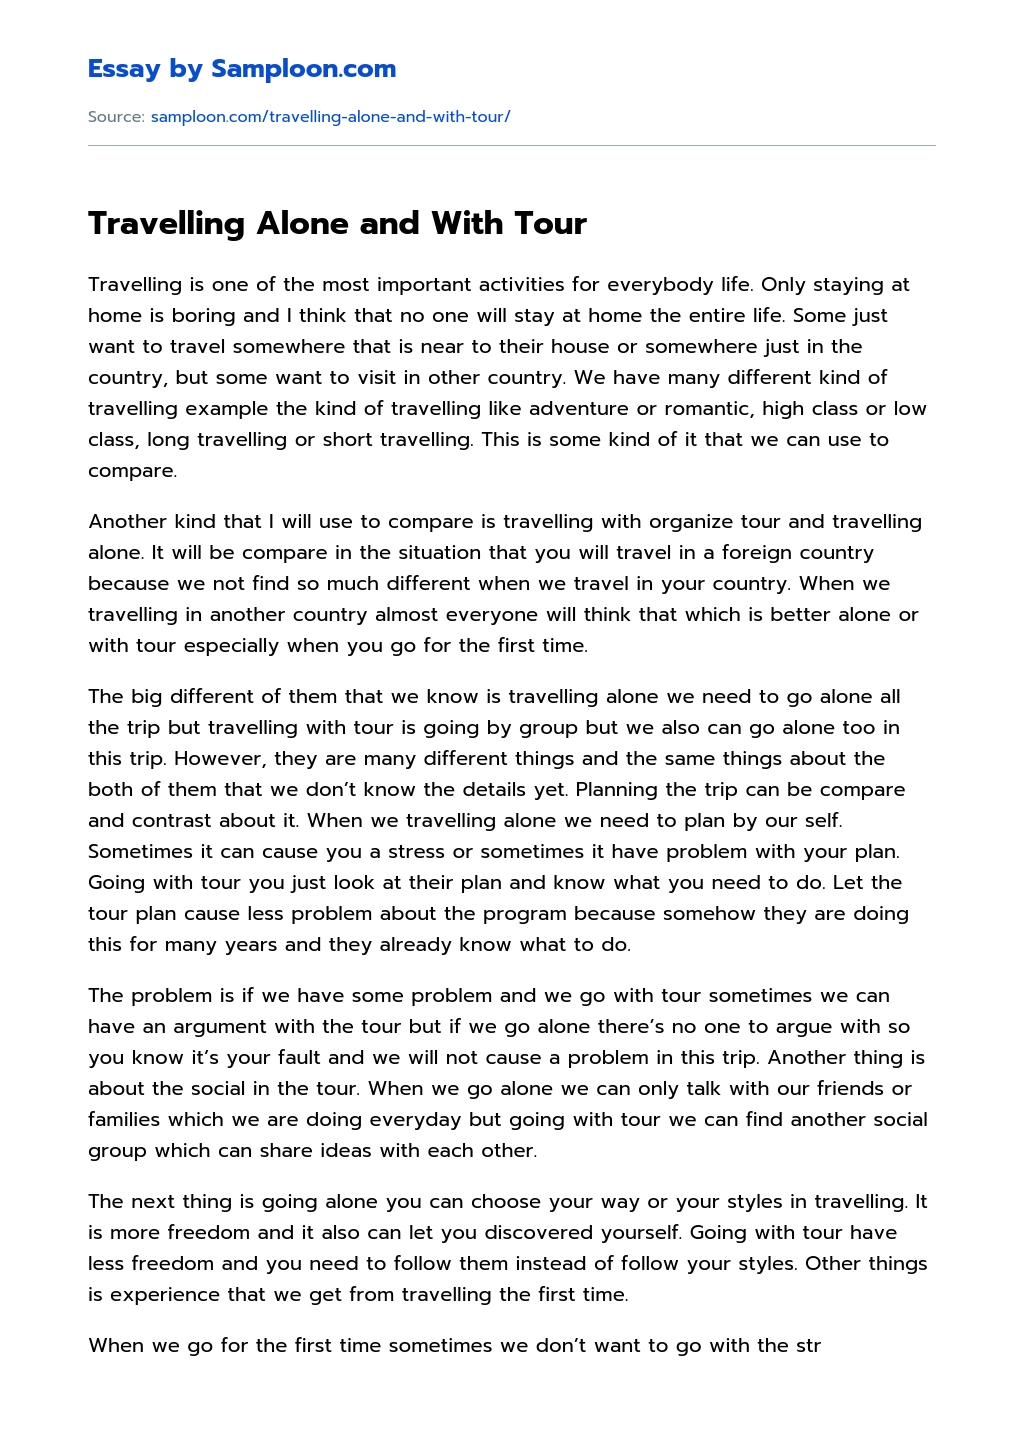 Travelling Alone and With Tour essay